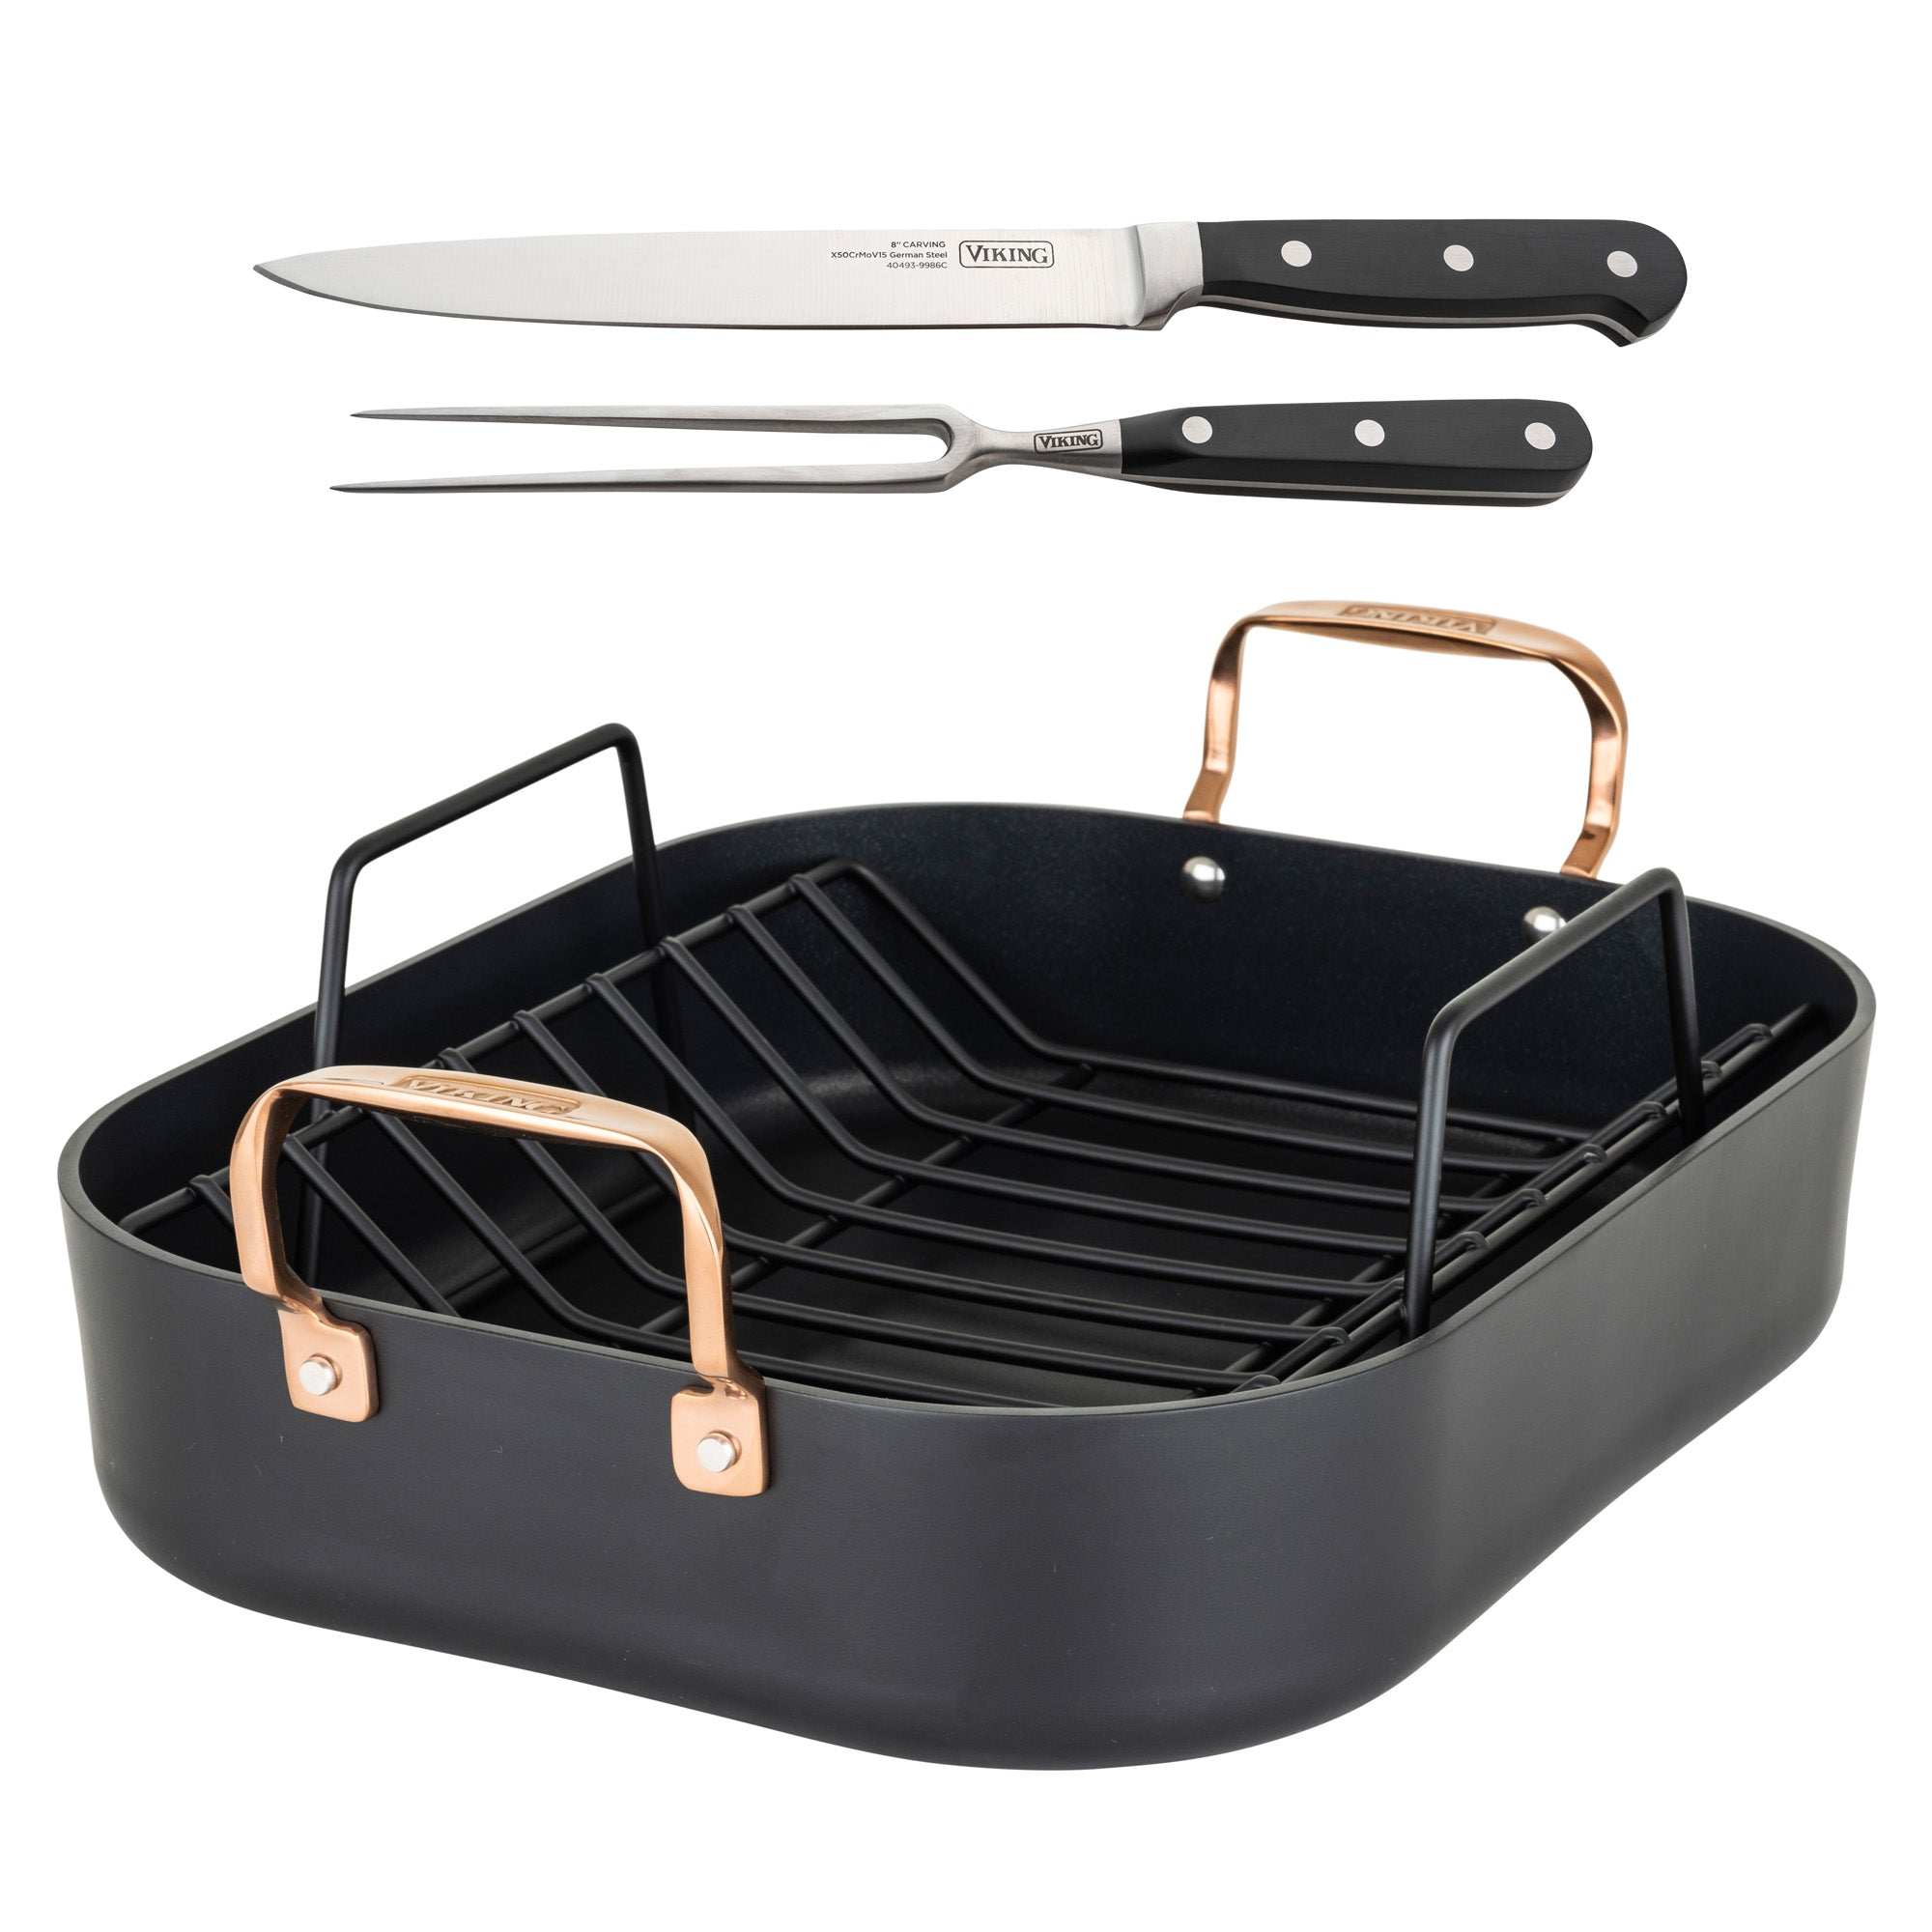 Large Stainless Steel Roasting Pan with Nonstick Rack